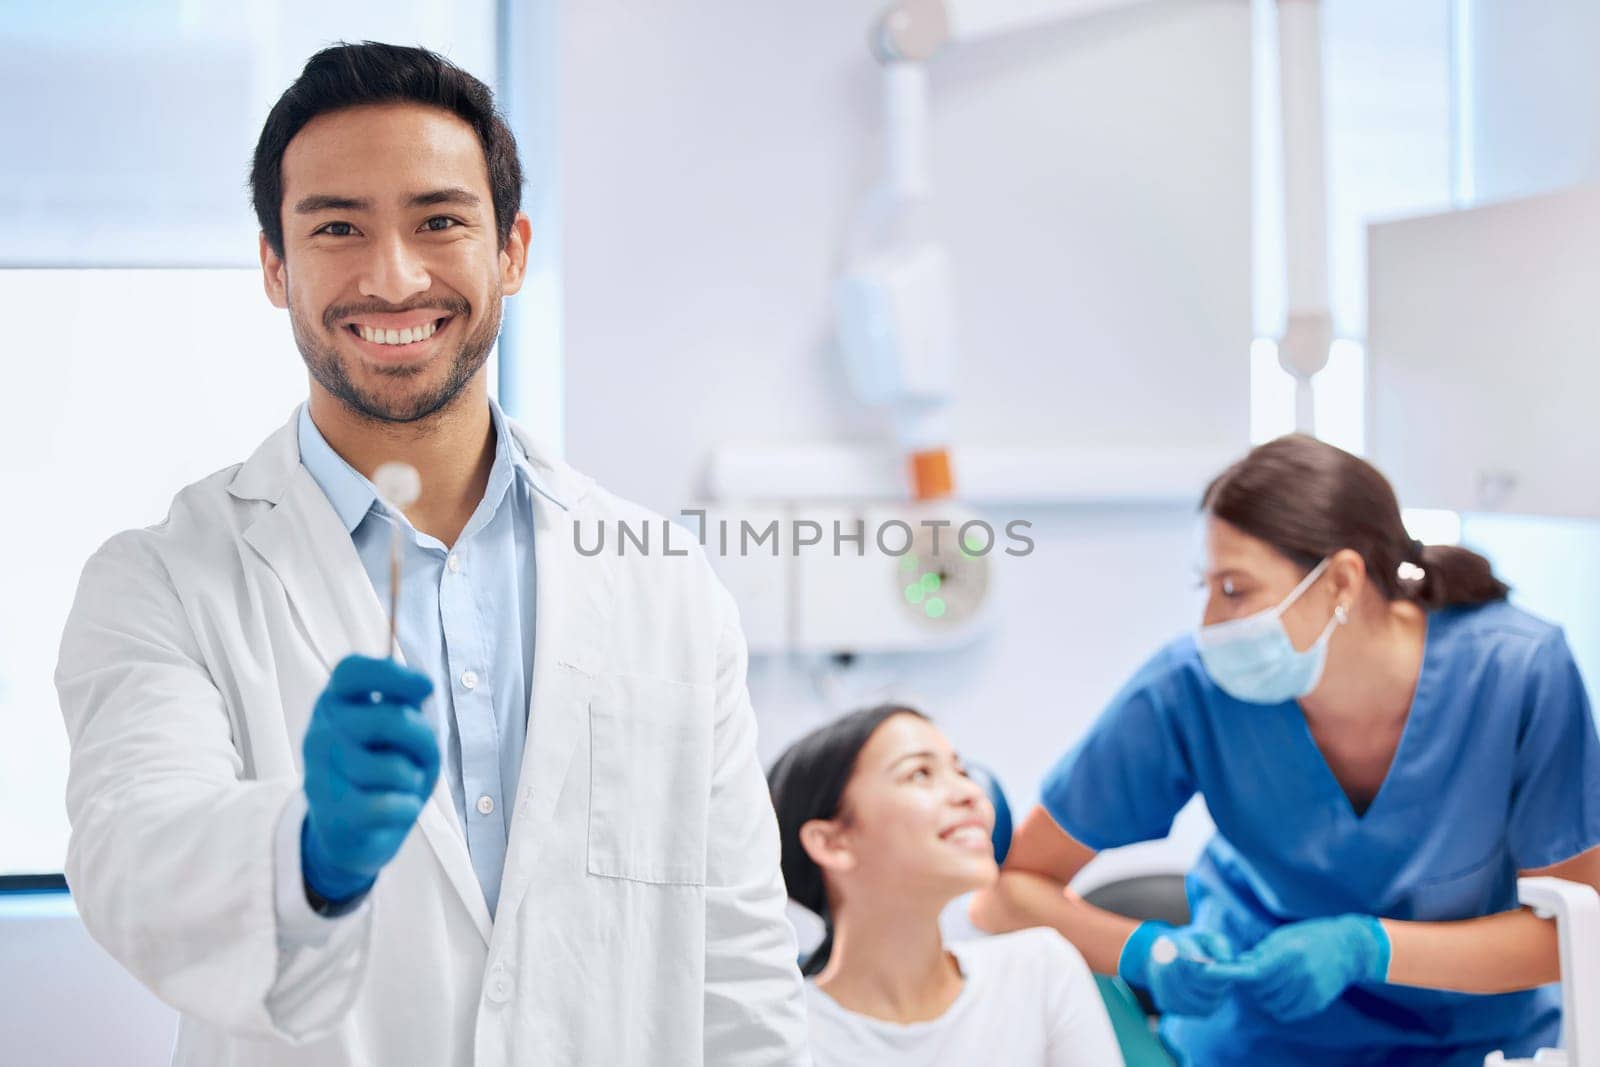 Providing his patients with high grade tools. a young dentist holding up a tool while his assistant helps a patient